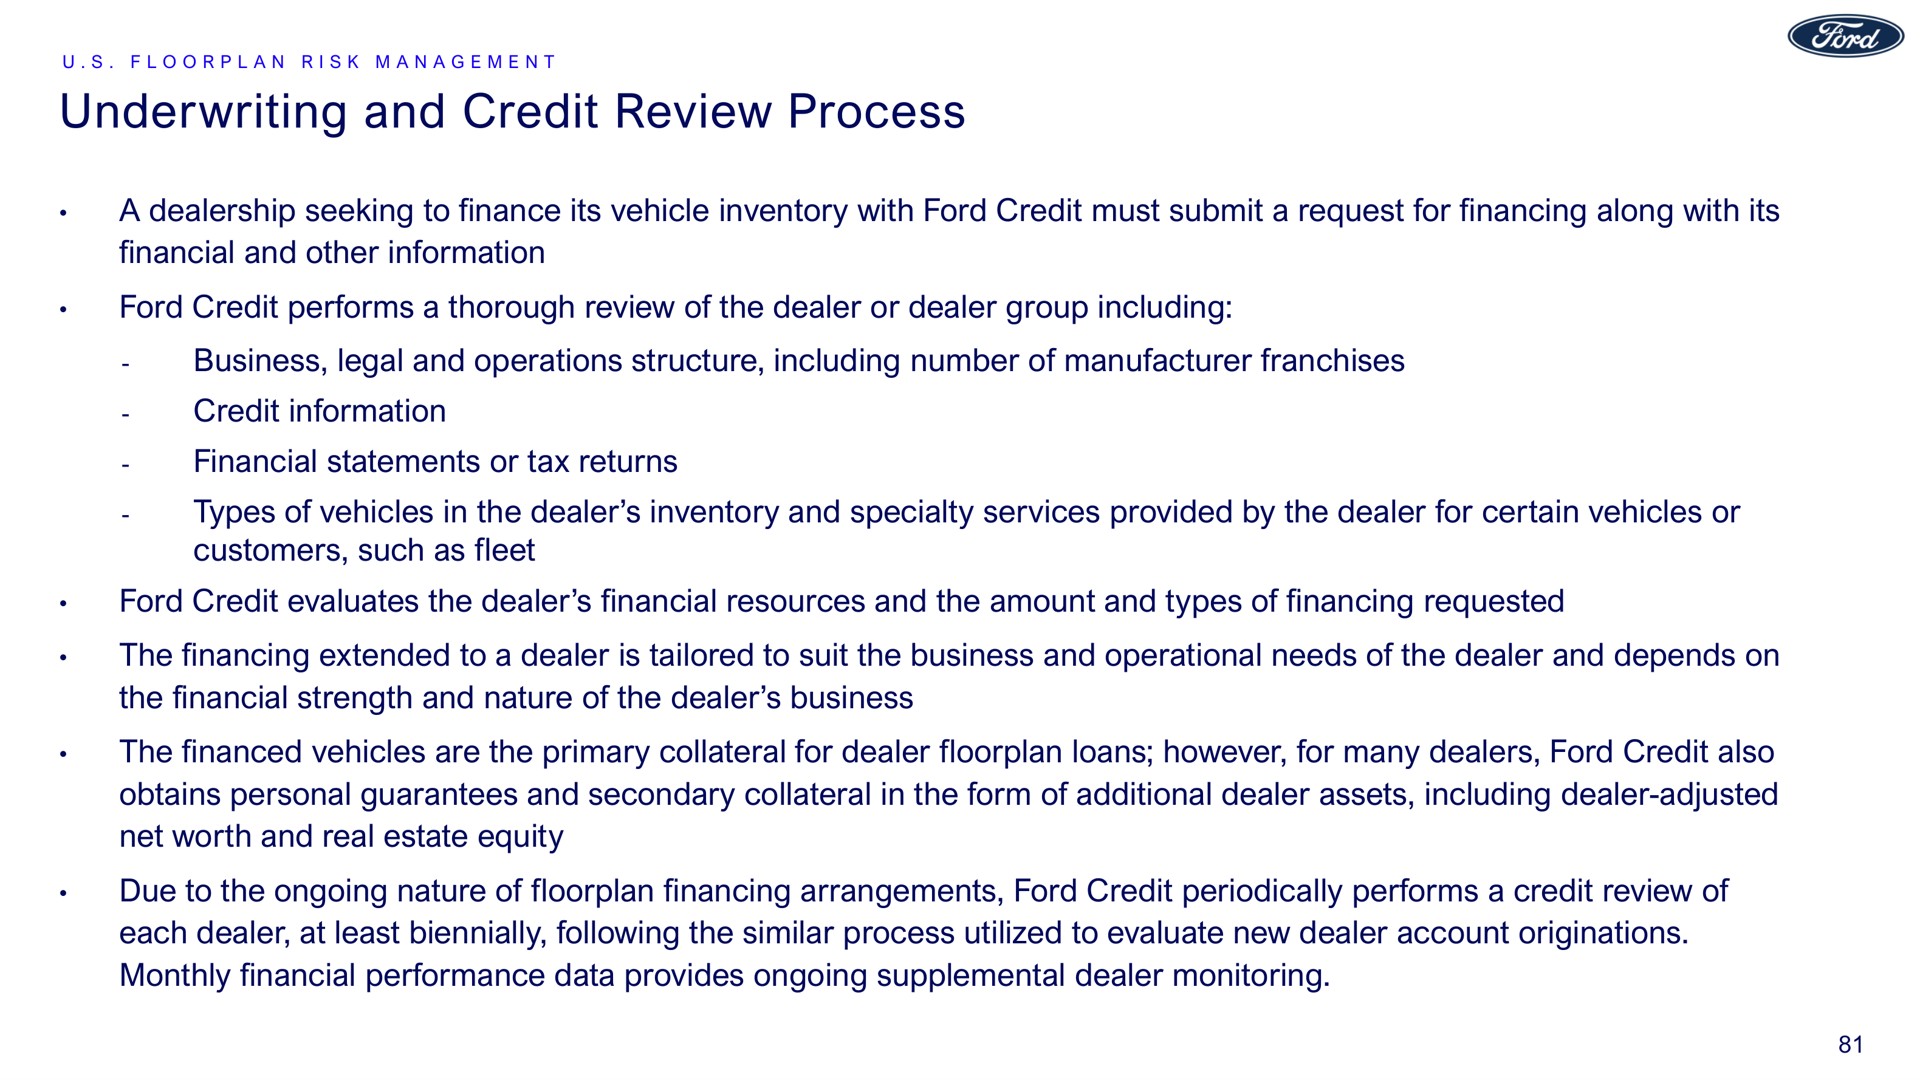 underwriting and credit review process a dealership seeking to finance its vehicle inventory with ford credit must submit a request for financing along with its financial and other information ford credit performs a thorough review of the dealer or dealer group including business legal and operations structure including number of manufacturer franchises credit information financial statements or tax returns types of vehicles in the dealer inventory and specialty services provided by the dealer for certain vehicles or customers such as fleet ford credit evaluates the dealer financial resources and the amount and types of financing requested the financing extended to a dealer is tailored to suit the business and operational needs of the dealer and depends on the financial strength and nature of the dealer business the financed vehicles are the primary collateral for dealer loans however for many dealers ford credit also obtains personal guarantees and secondary collateral in the form of additional dealer assets including dealer adjusted net worth and real estate equity due to the ongoing nature of financing arrangements ford credit periodically performs a credit review of each dealer at least biennially following the similar process utilized to evaluate new dealer account originations monthly financial performance data provides ongoing supplemental dealer monitoring | Ford